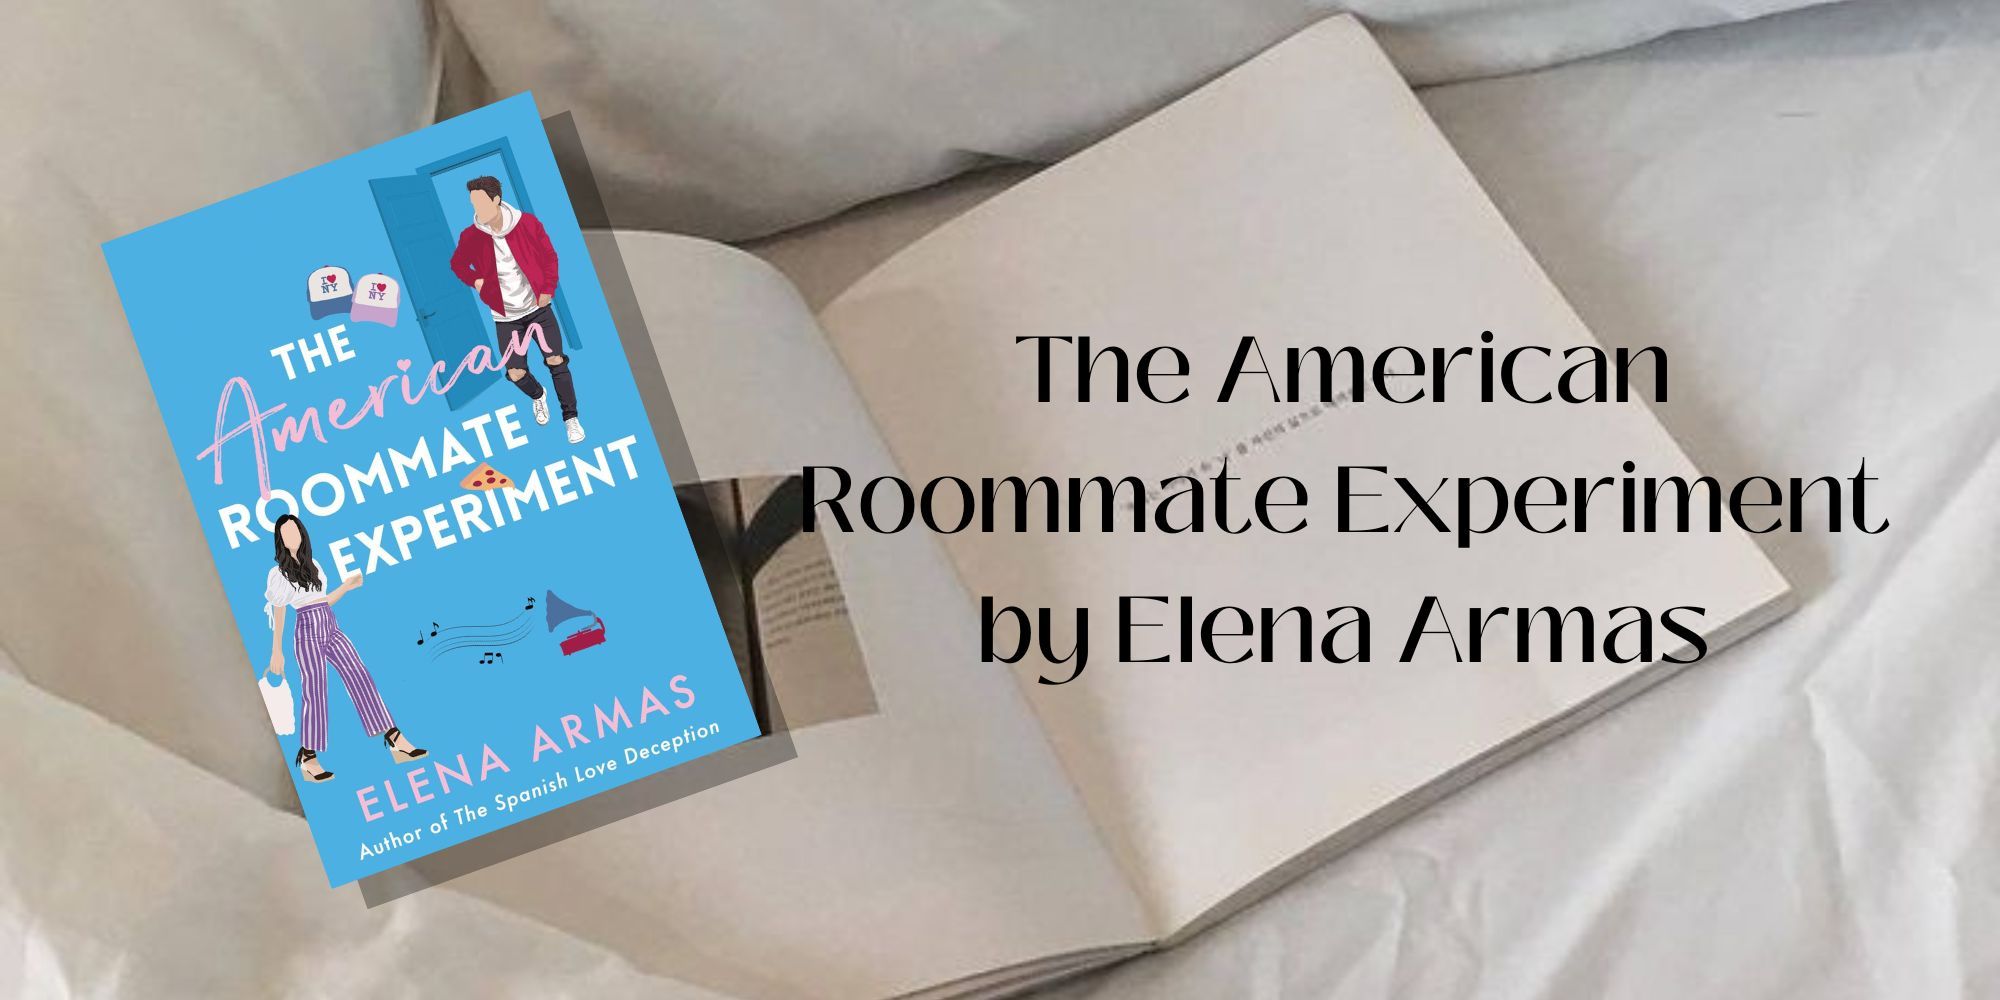 The cover of The American Roommate Experiment by Elena Armas